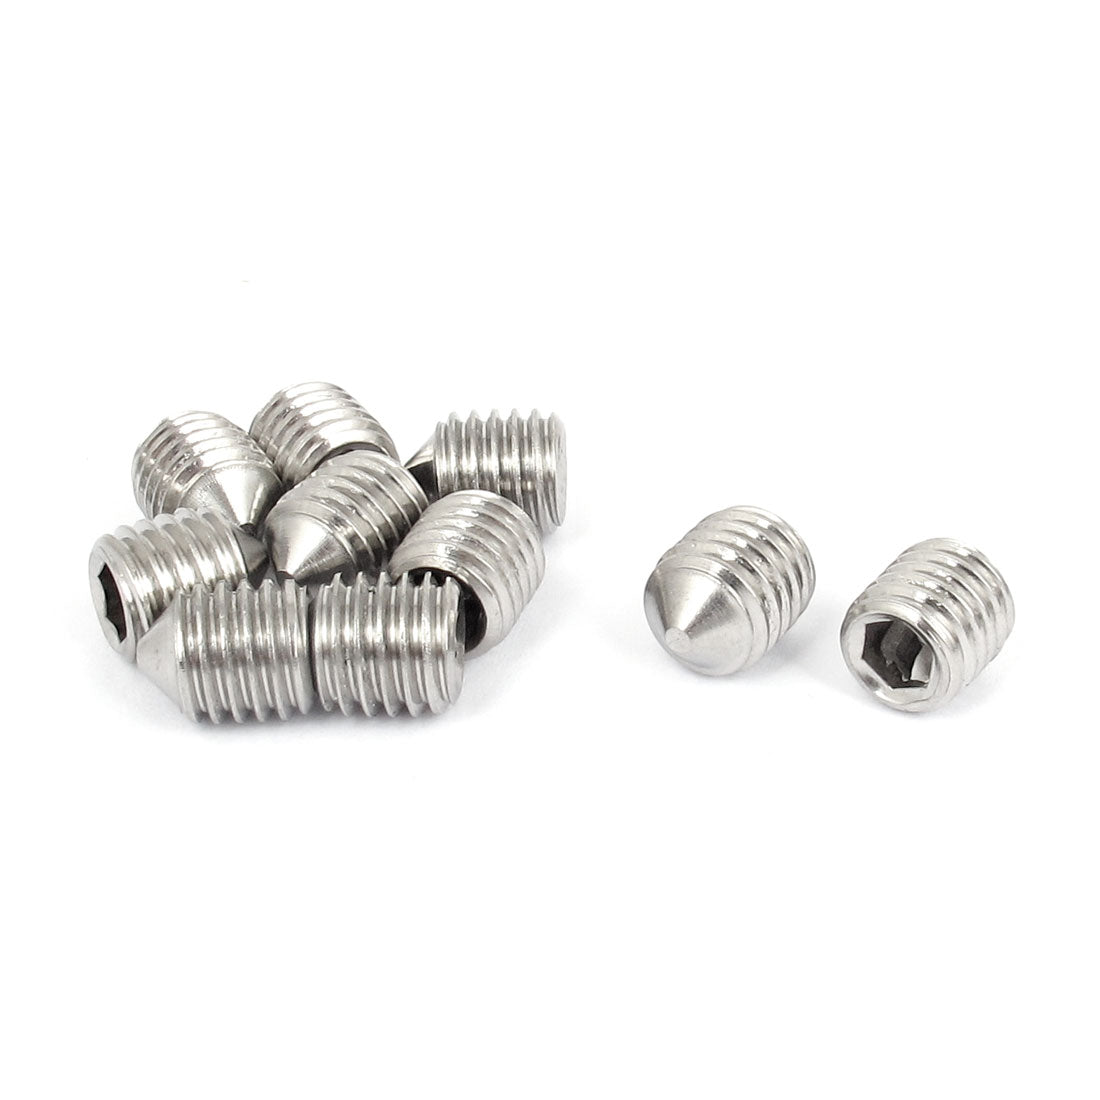 uxcell Uxcell M10x12mm 304 Stainless Steel Cone Point Hexagon Socket Grub Screws 10pcs